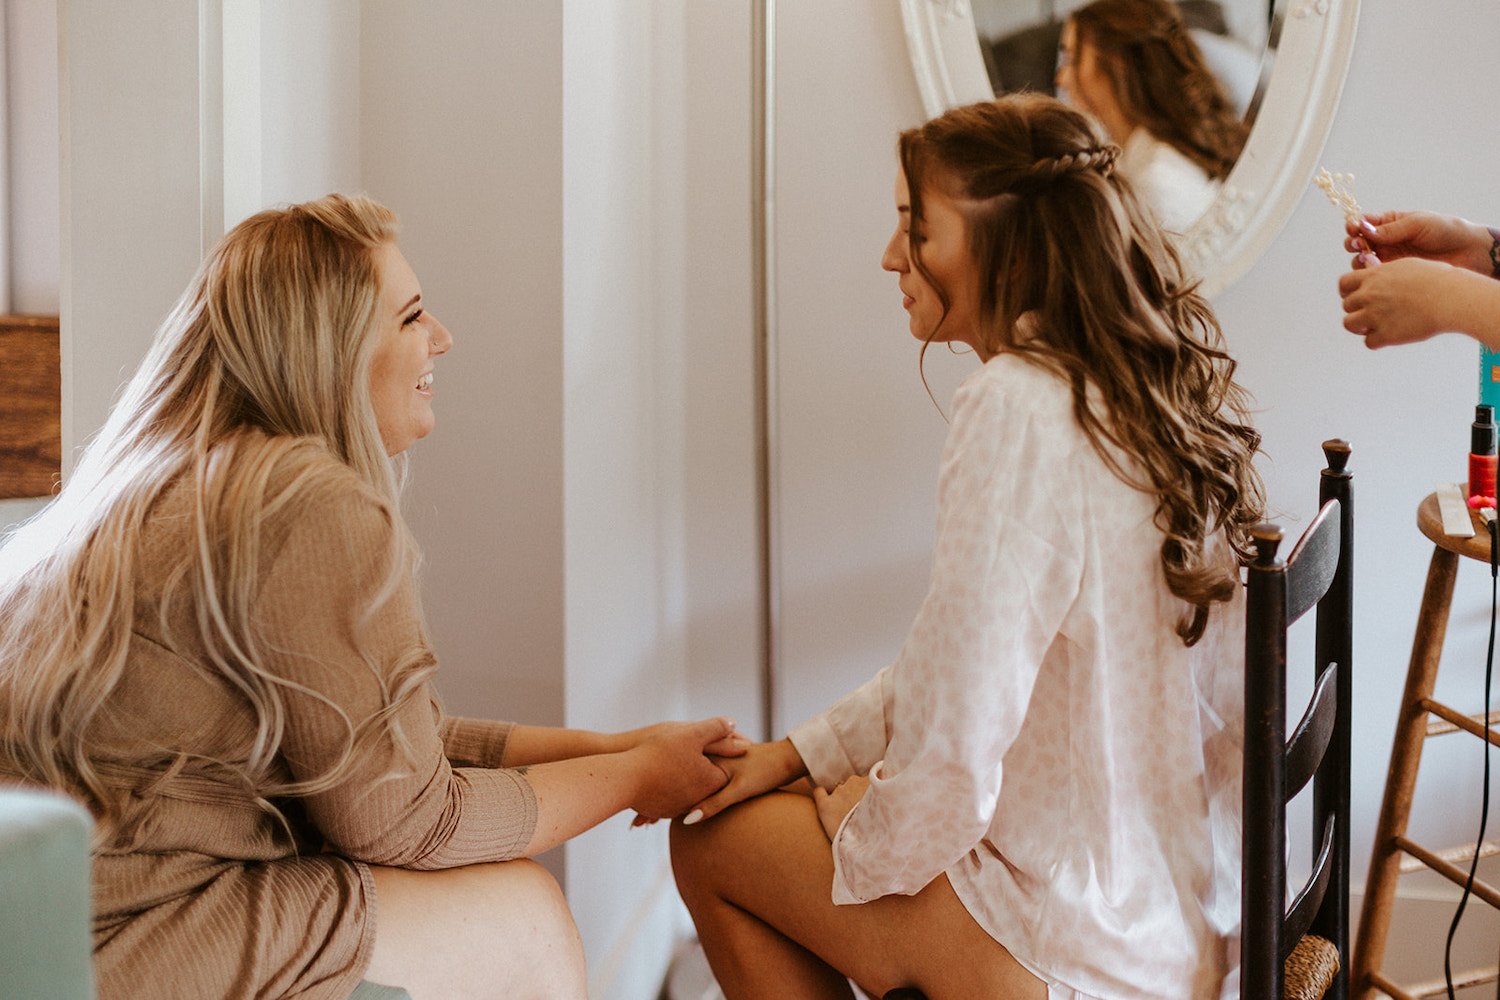 katherine-shares-moment-with-friend-5-tips-seamless-wedding-day-timeline-emilee-carpenter-photography.jpg